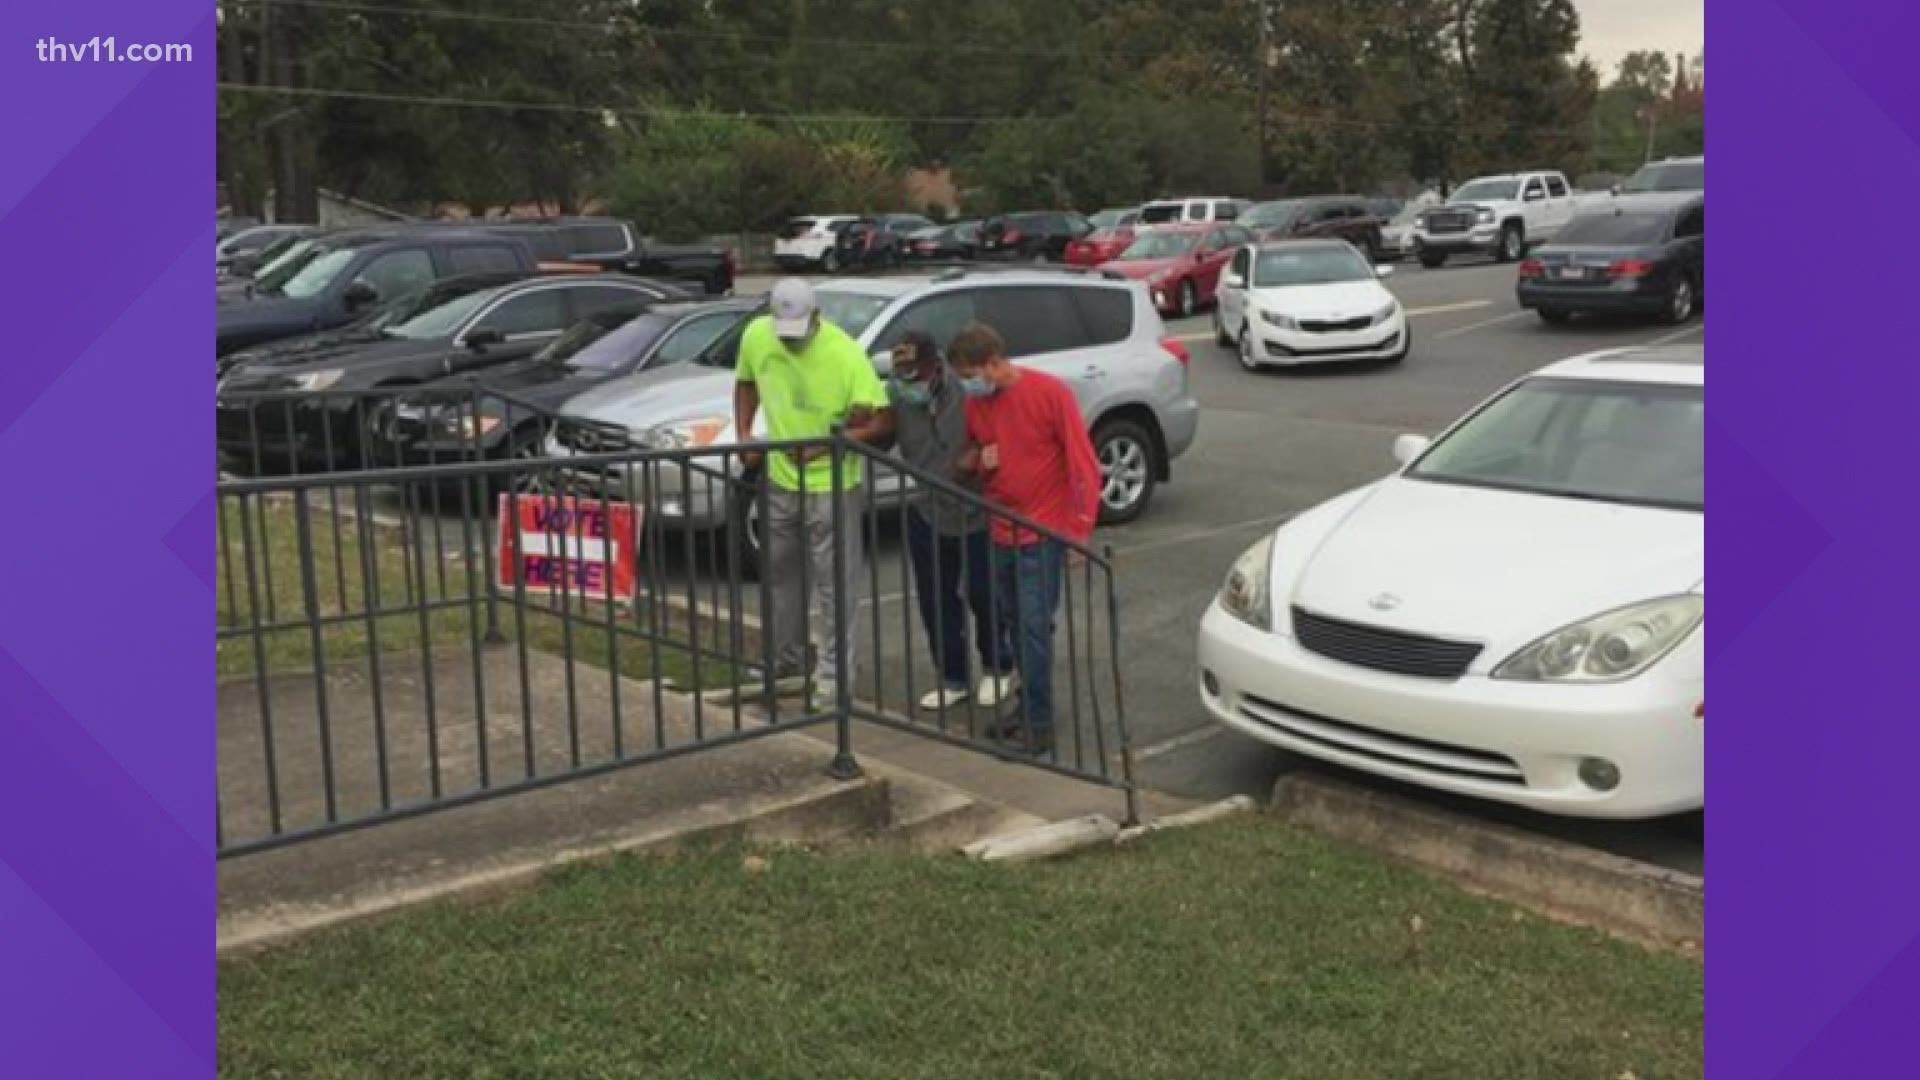 Despite the gloomy weather and long lines at polling places, a group of Arkansas voters decided to spread a little kindness.